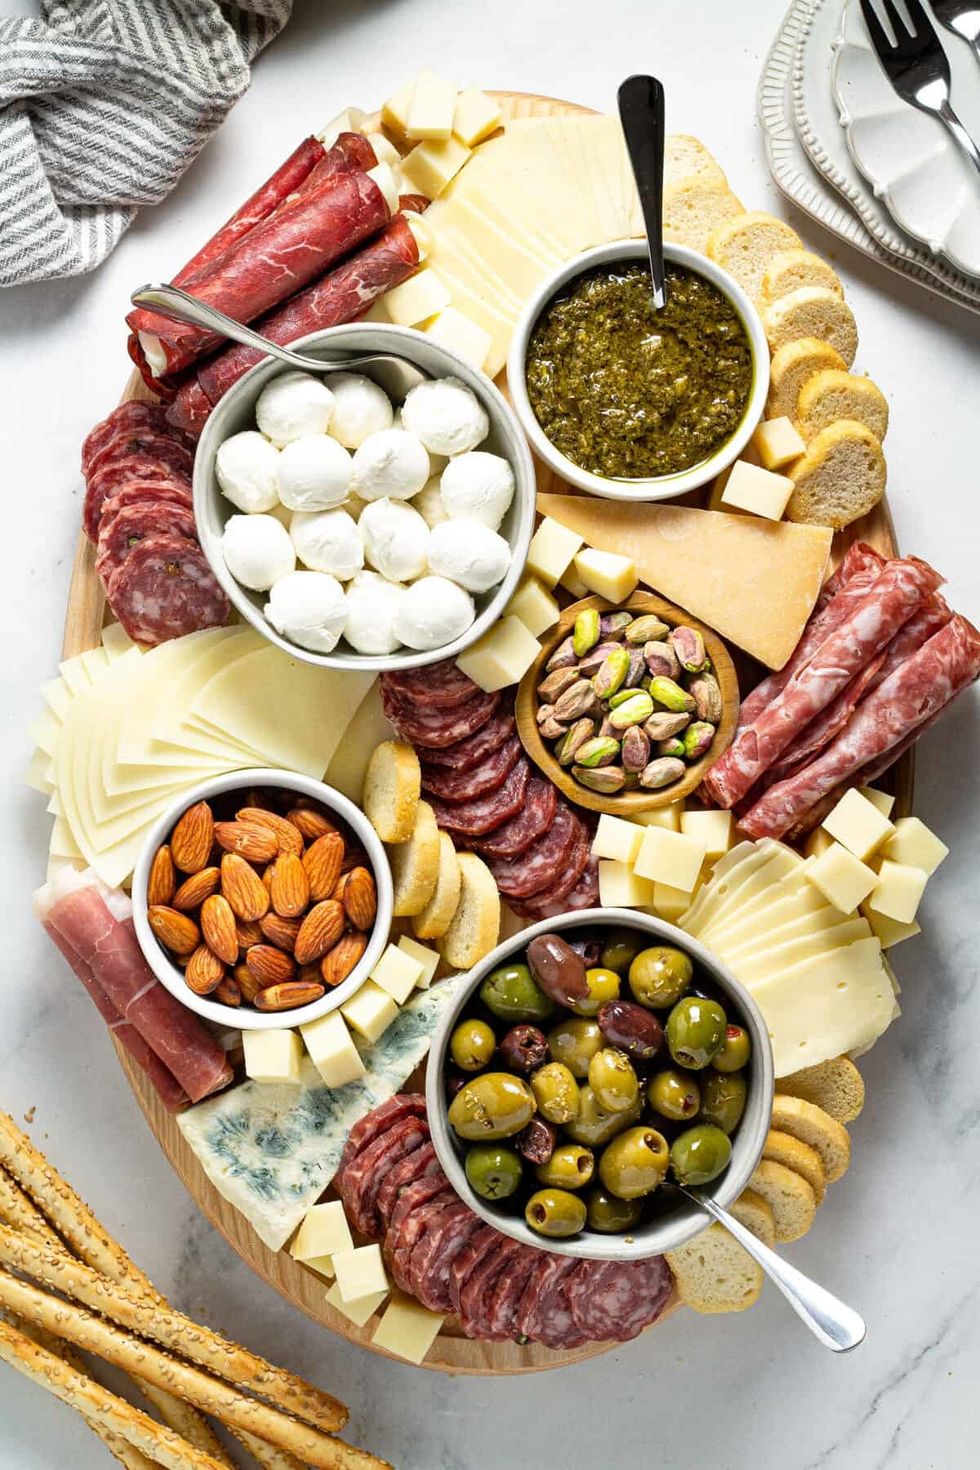 My Friends And I Threw A Charcuterie Party, Here's How You Can Do It Too